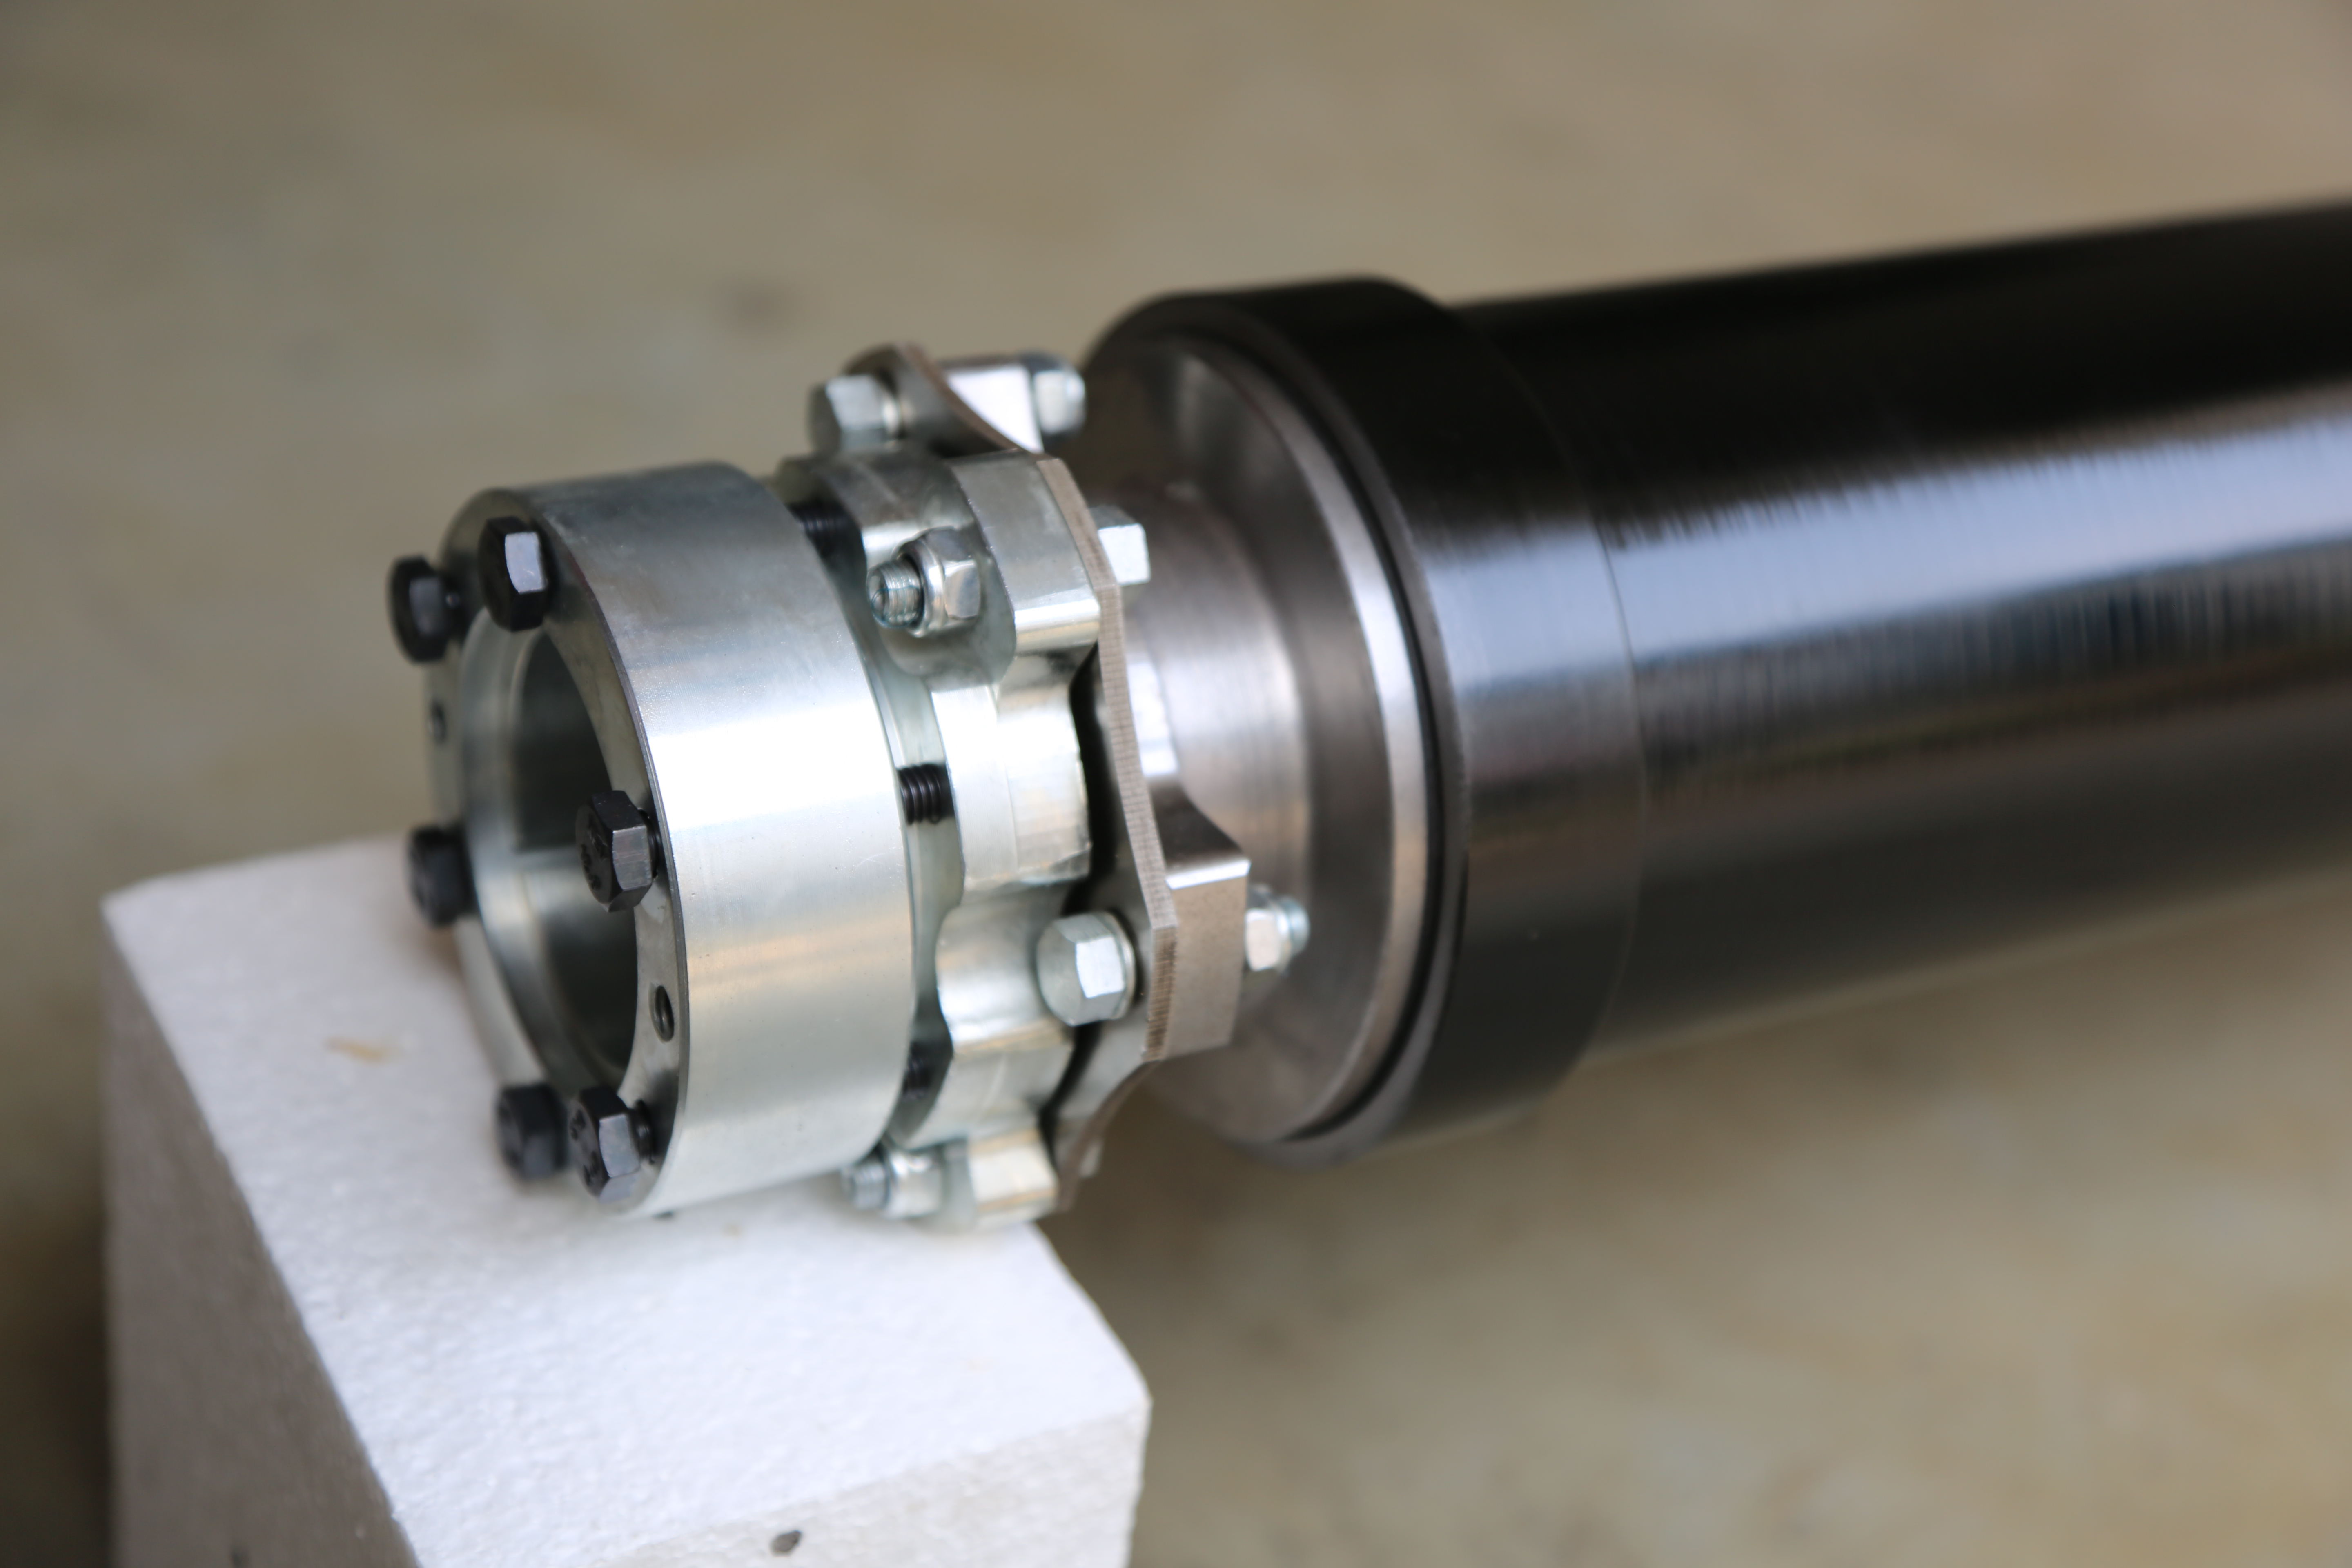 The lightweight material of the shaft coupling-carbon fiber